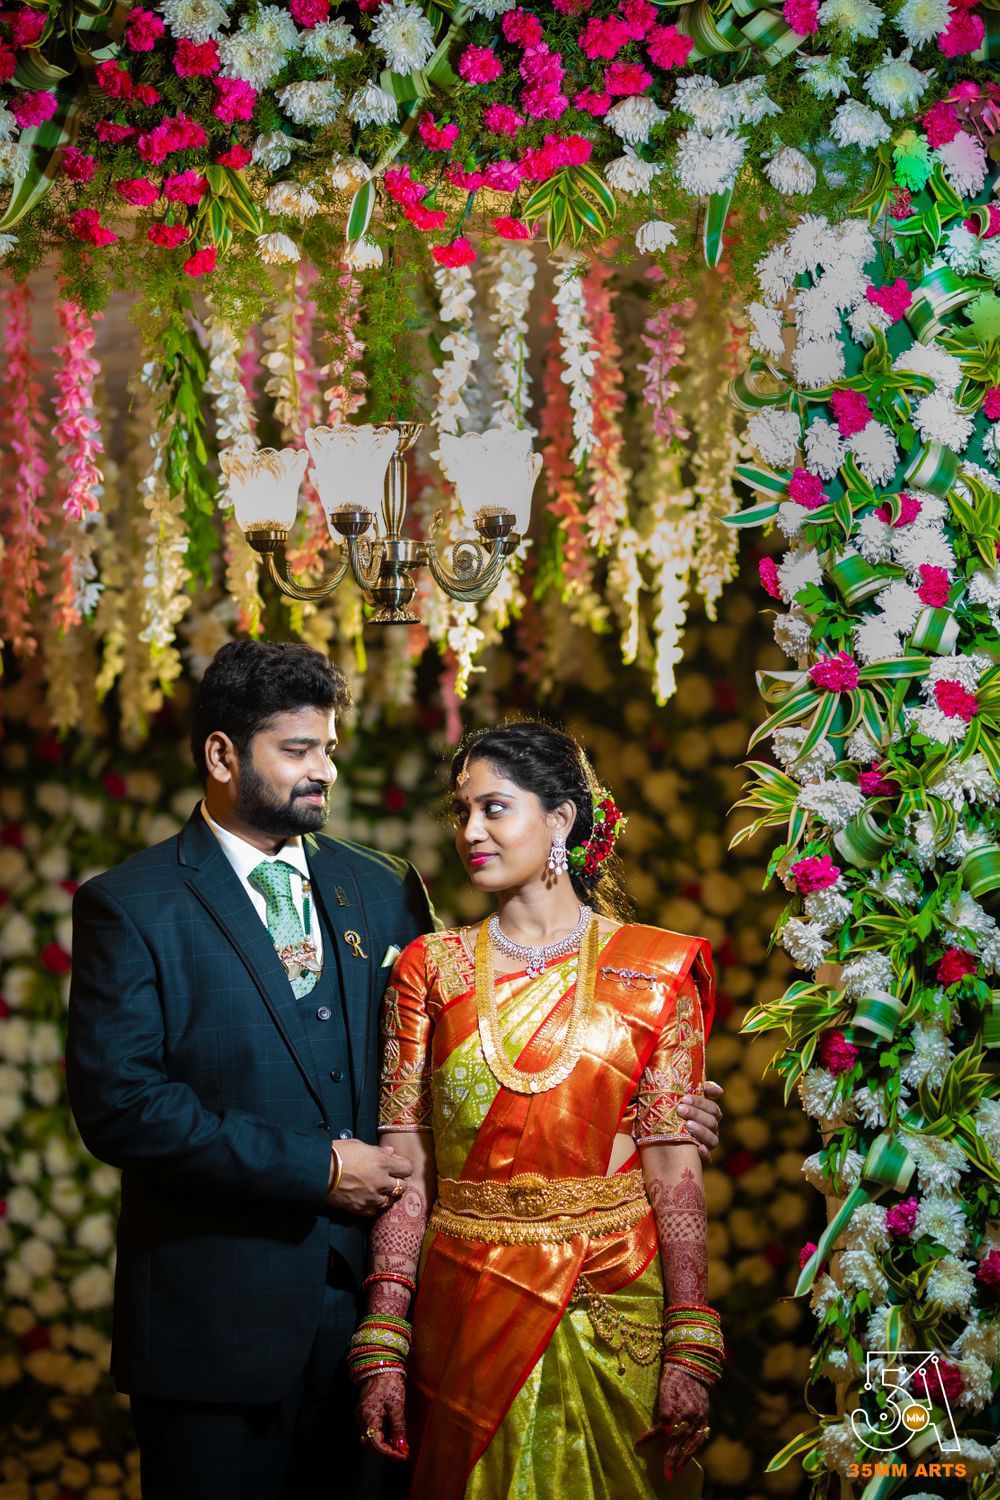 Photo From Wedding Moments of Sai & Mounika - 35mmarts Photography - By  35mm Arts